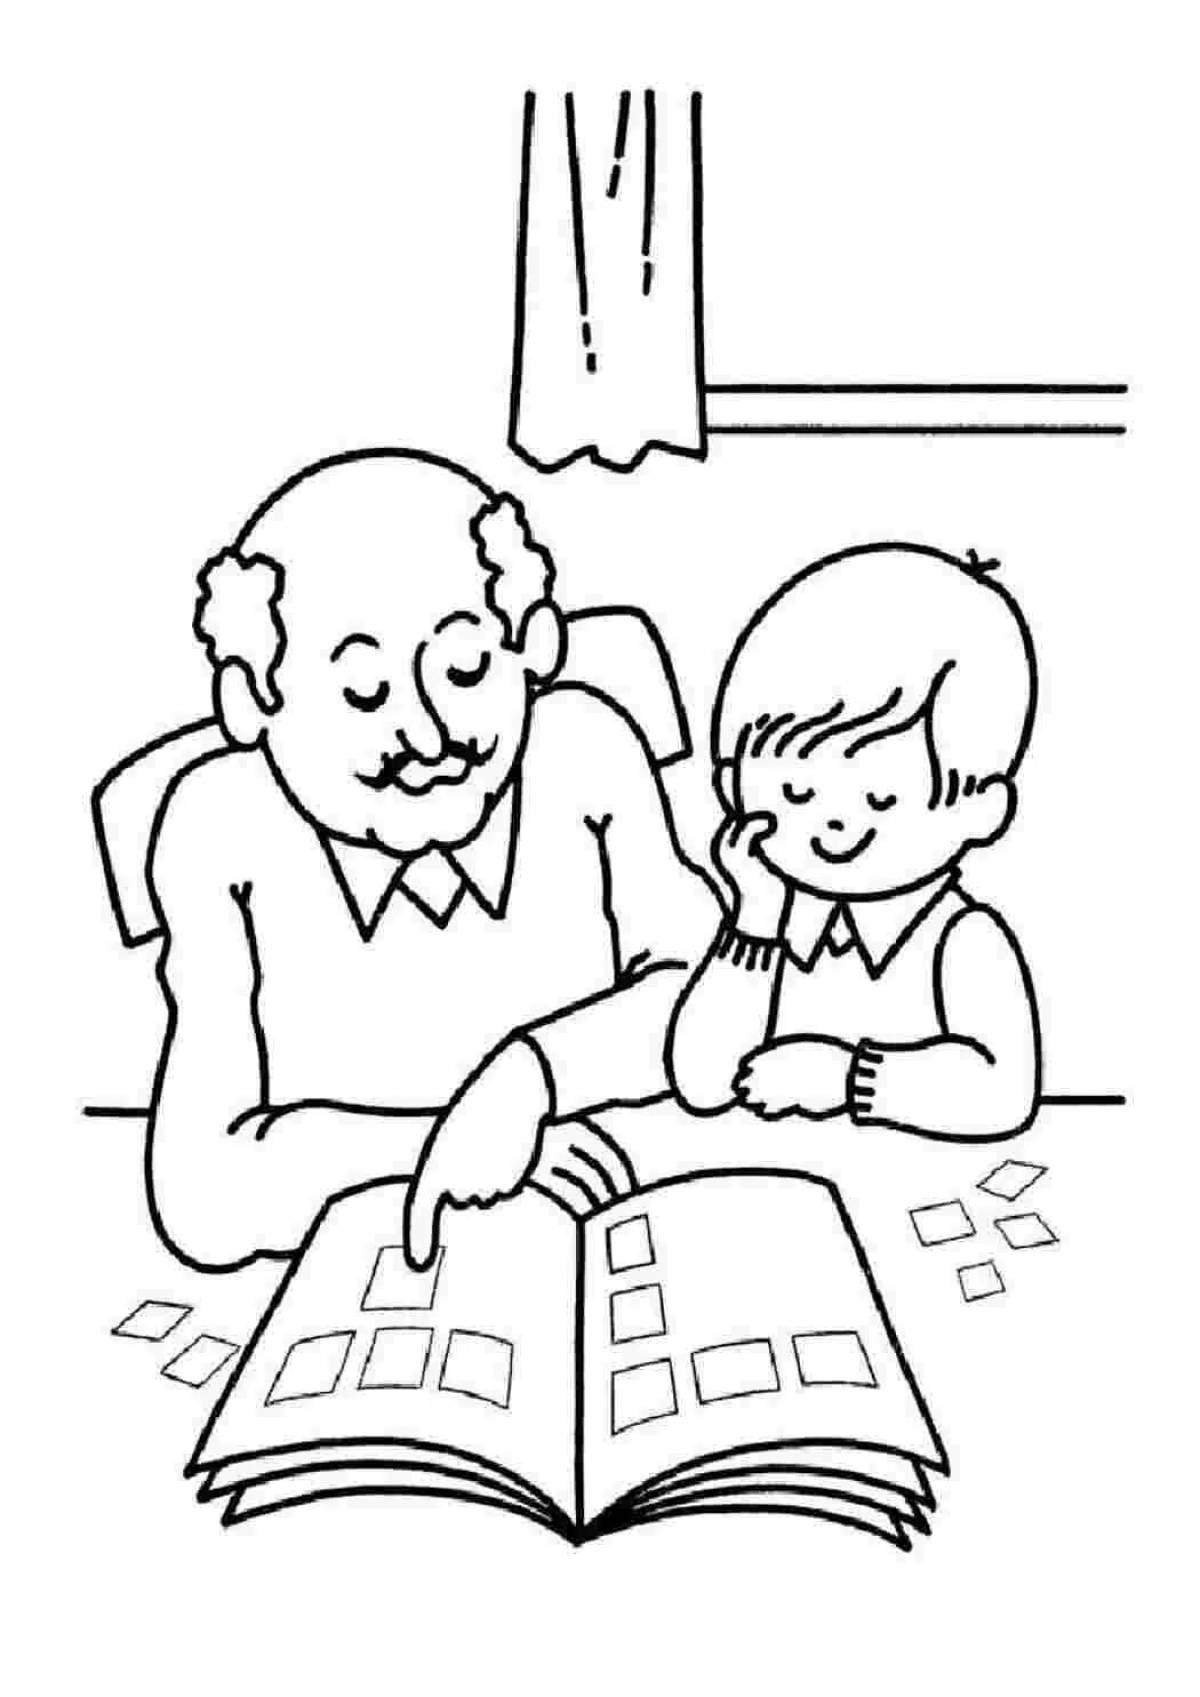 Adorable grandparents coloring book for kids